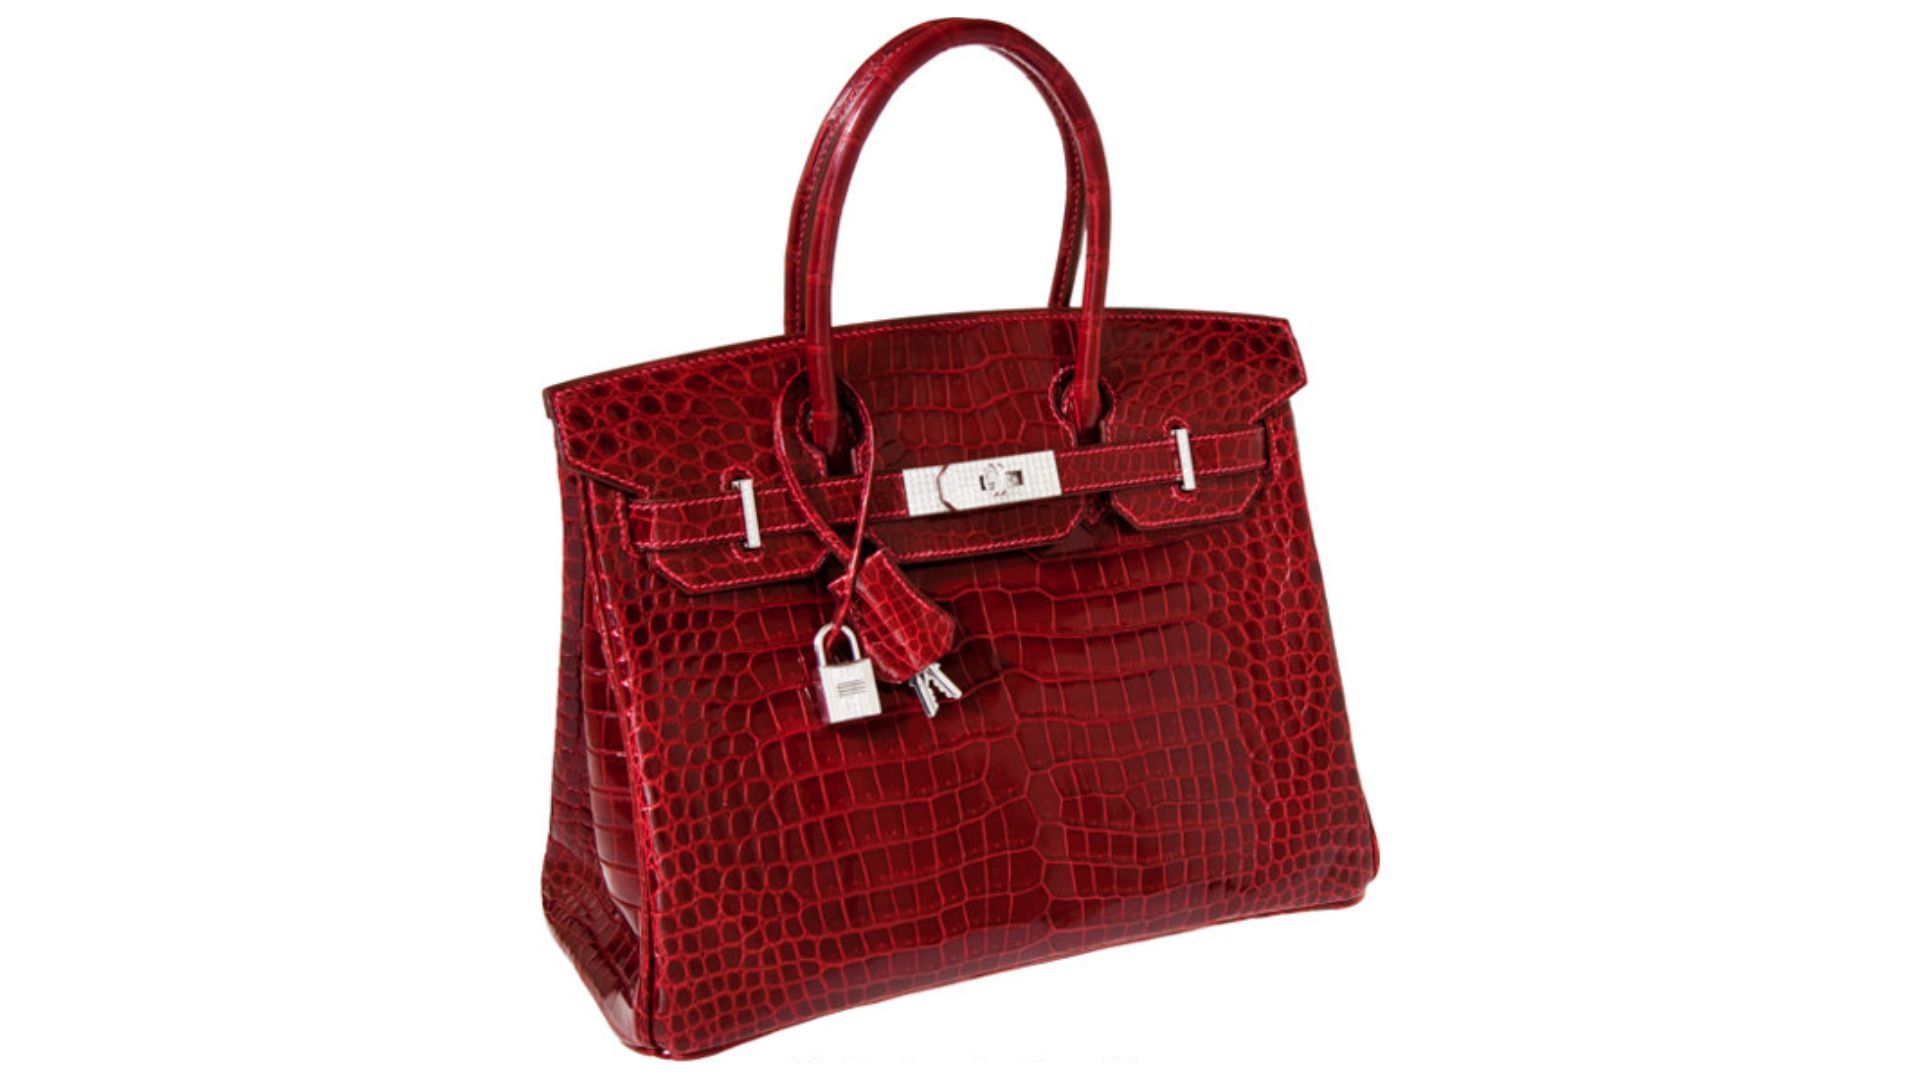 Most Expensive Birkin Ever Sold at Christies